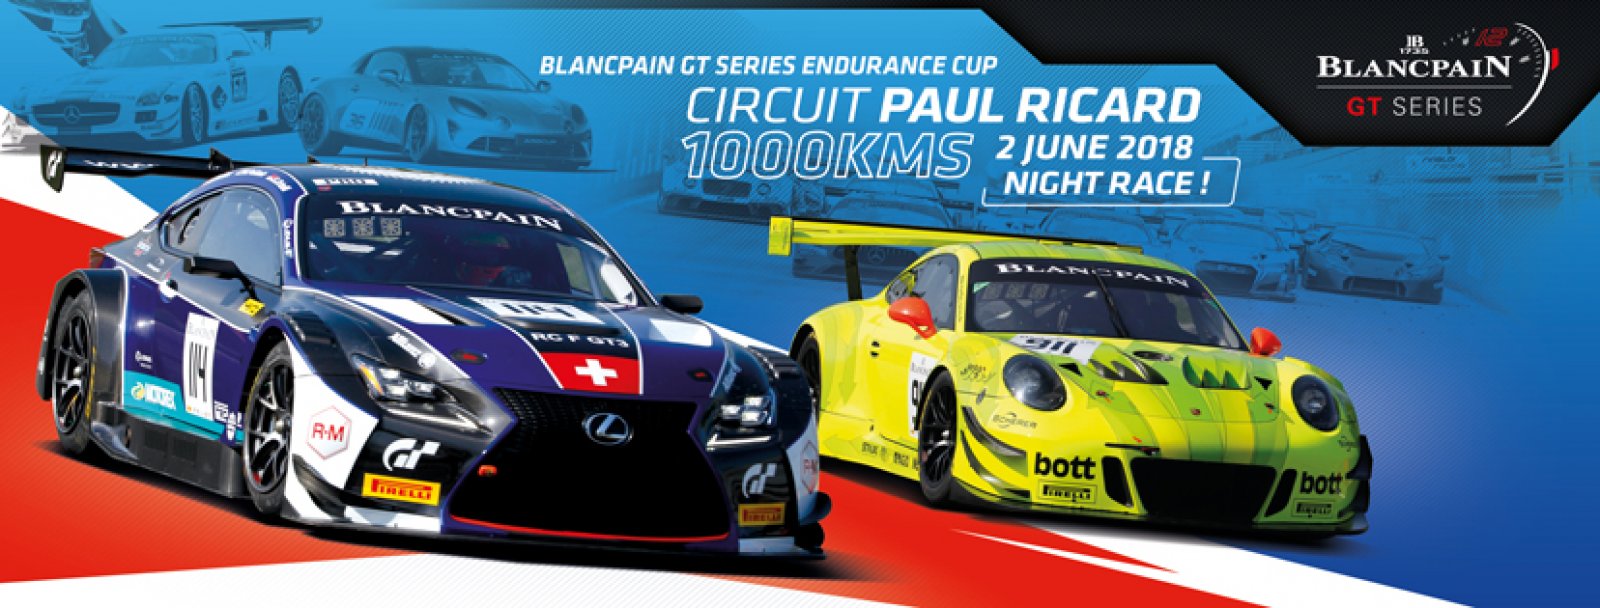 Blancpain GT Series gears up for 1000km race into the night at Paul Ricard 